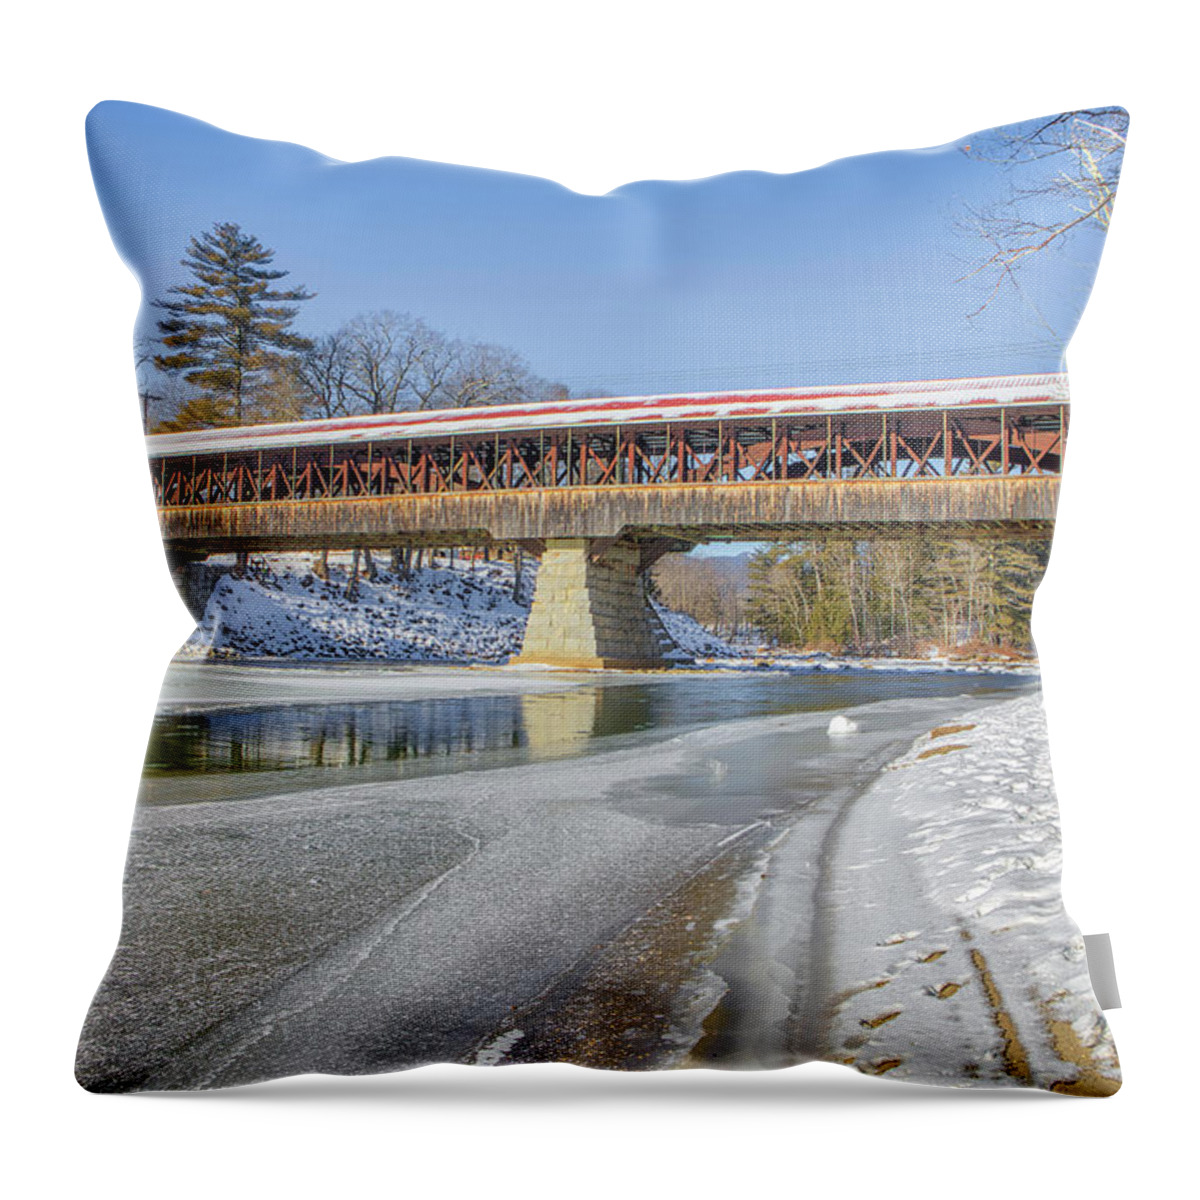 Sacco River Covered Bridge Throw Pillow featuring the photograph Conway New Hampshire Sacco River Covered Bridge by Juergen Roth